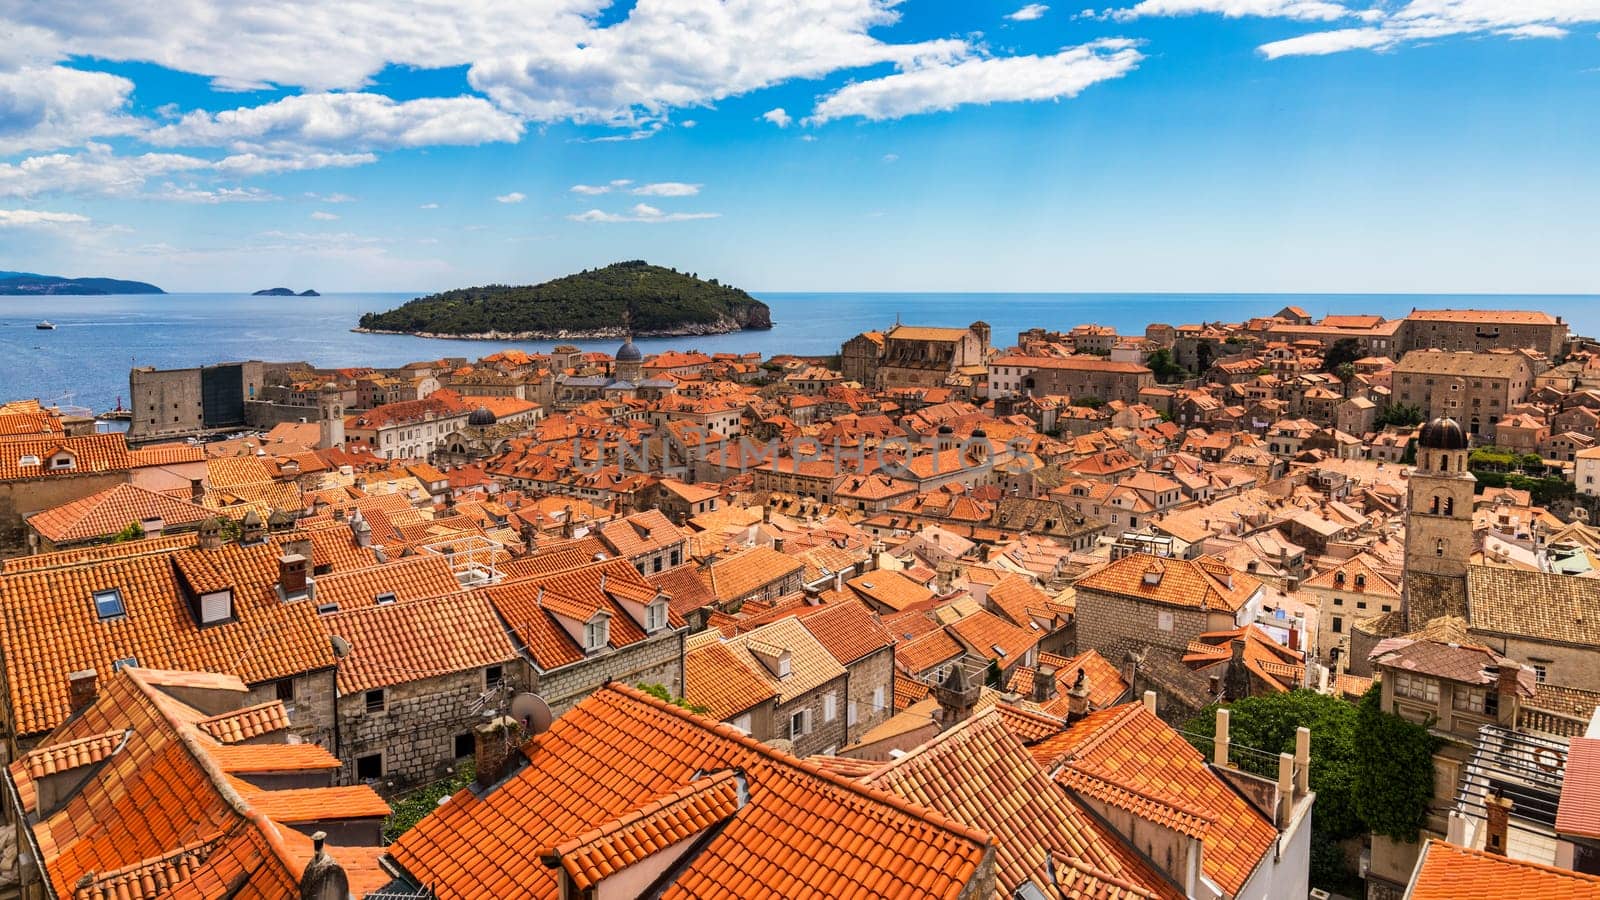 Dubrovnik a city in southern Croatia fronting the Adriatic Sea, Europe. Old city center of famous town Dubrovnik, Croatia. Picturesque view on Dubrovnik old town (medieval Ragusa) and Dalmatian Coast. by DaLiu